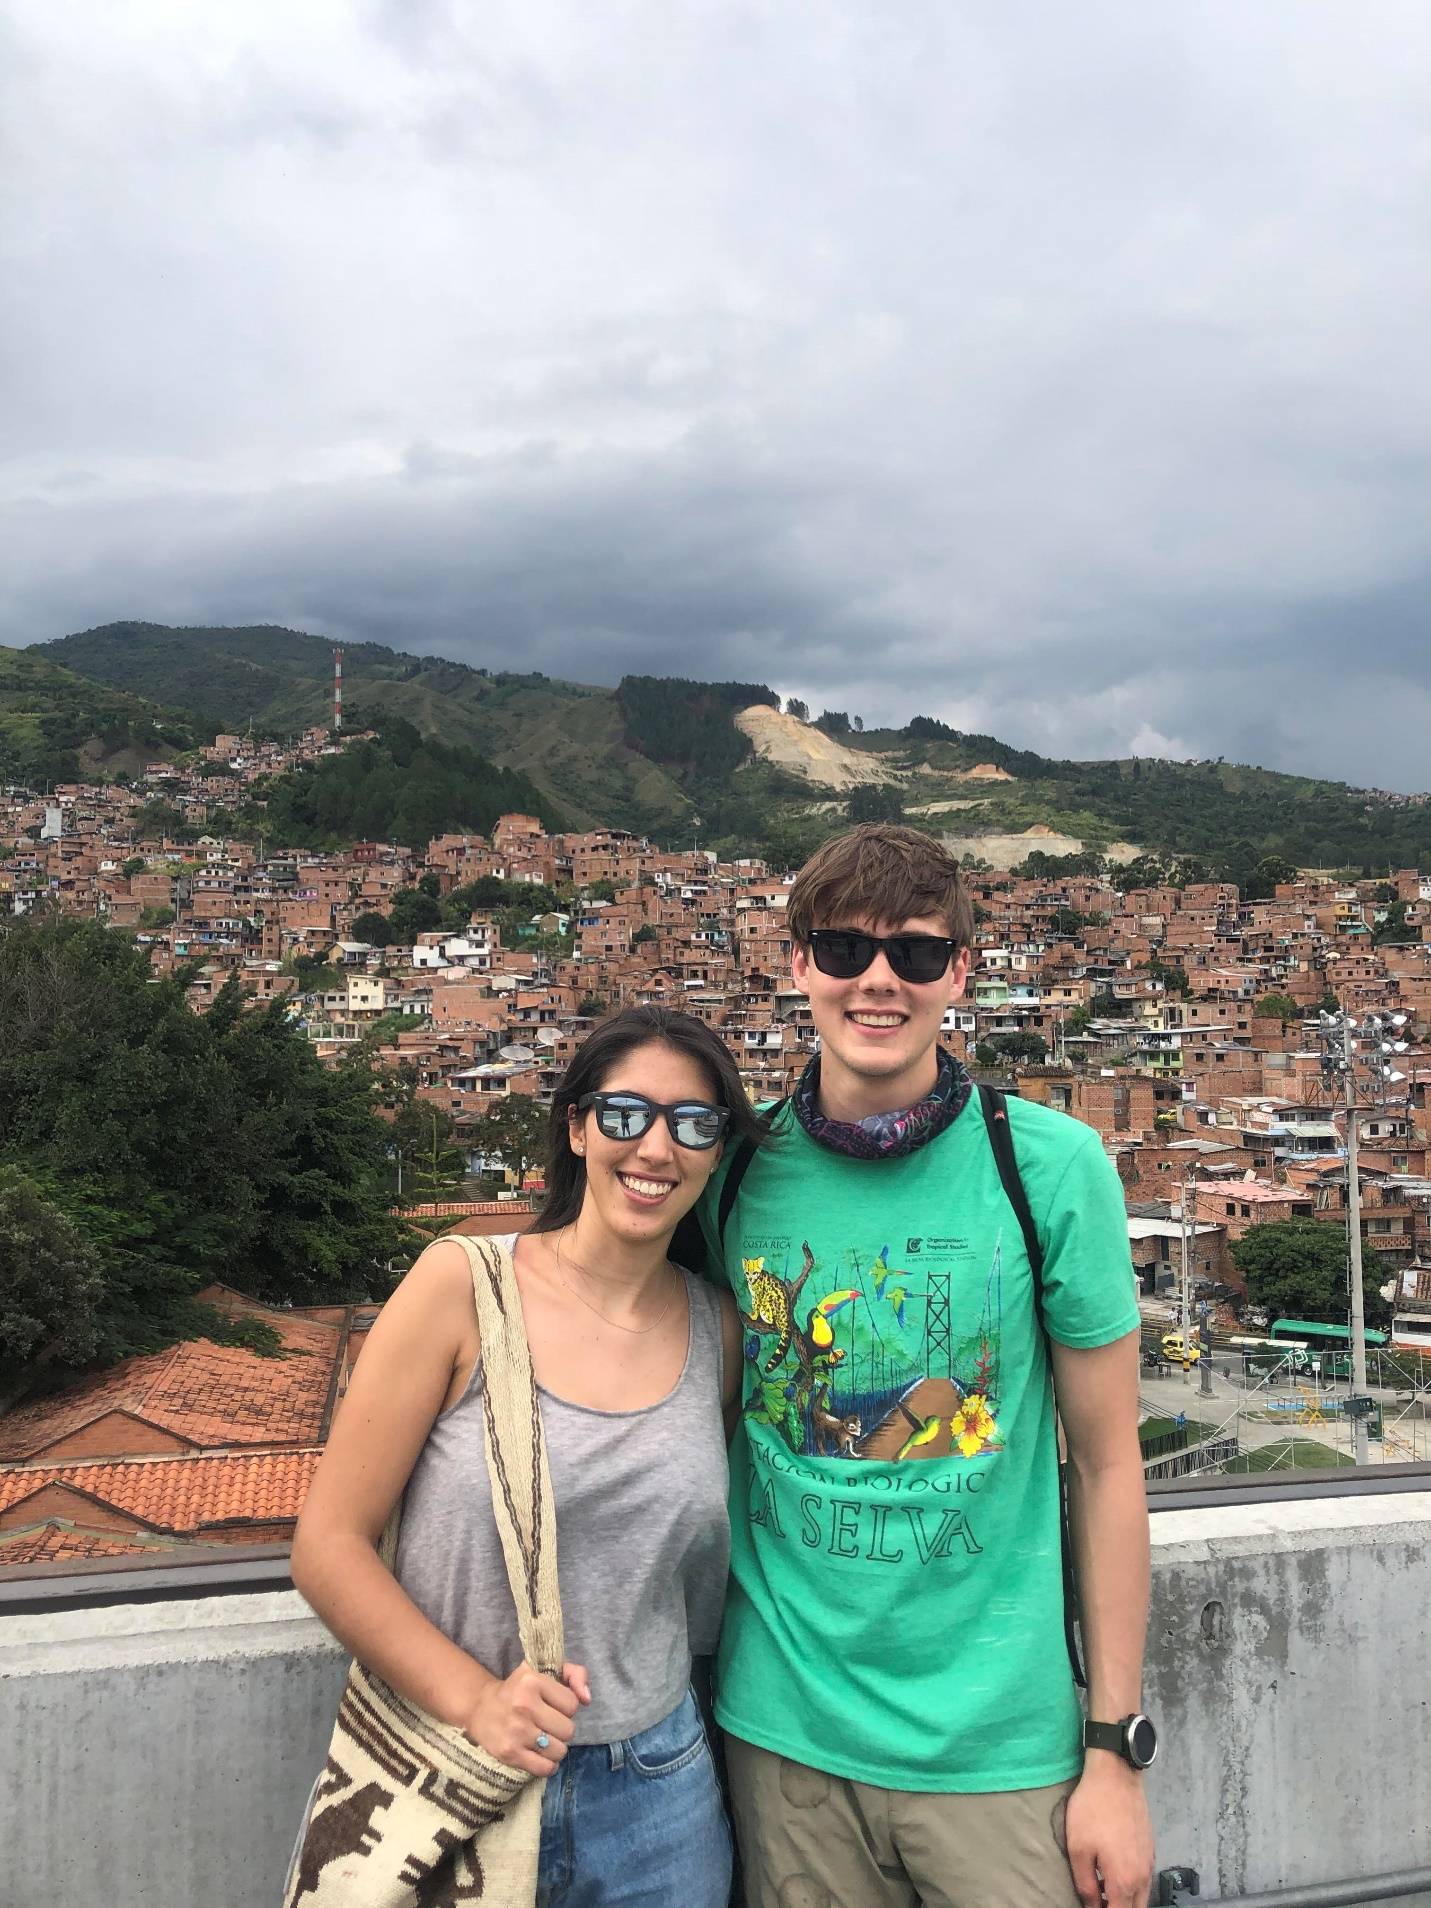 Susana Vega and I exploring Medellín. All houses had beautiful red clay roofs.